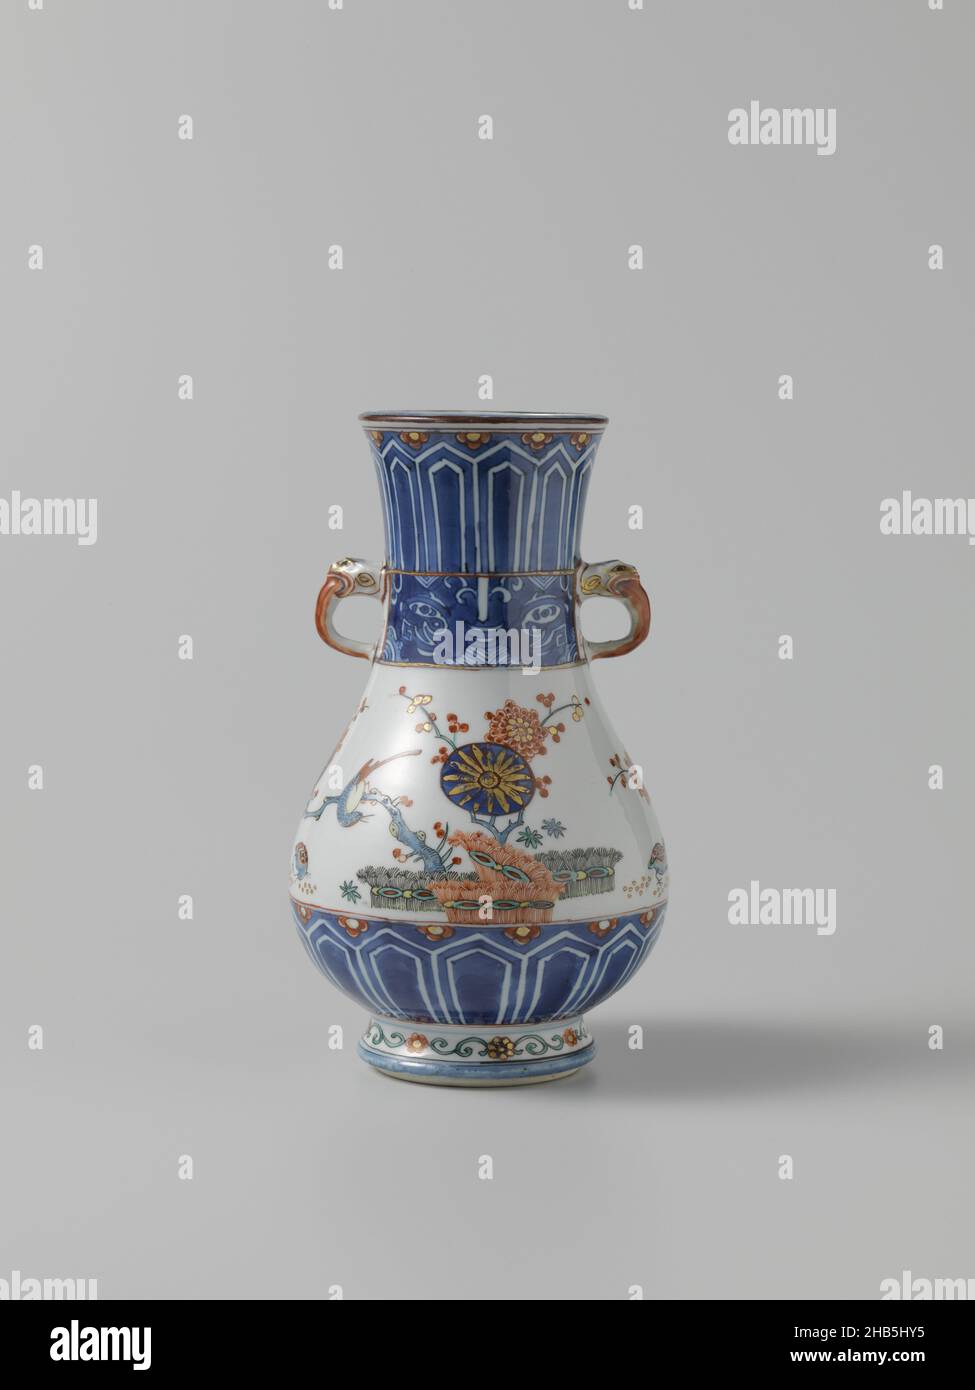 Pear-shaped vase with ornamental borders, flowering plants, brushwood fences and birds, Pear-shaped vase of porcelain with a wide, slightly spreading neck and two modeled ears in the shape of animal heads. Painted in underglaze blue and on the glaze blue, red, green, yellow, black and gold. Decorated in China on the belly in underglaze blue with four yin yang symbols; underneath, a blue band with cut-out leaf motifs and half flowers. The neck with the same band and a band with 'taotie' masks on napkin. In Europe on the belly decorated in enamel colors with birds on prune branches behind tied Stock Photo